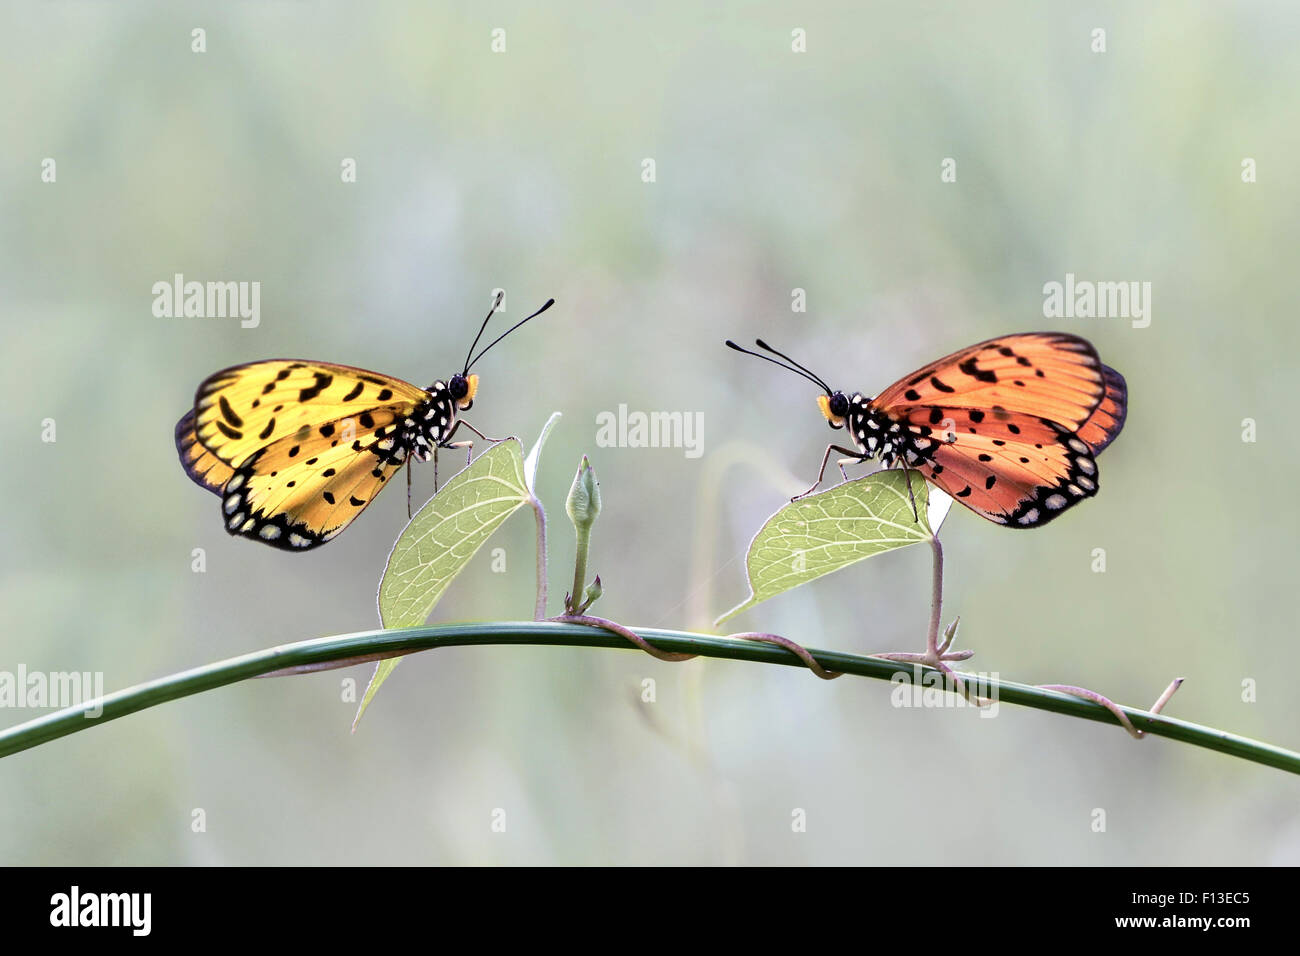 Two butterflies on a plant Stock Photo